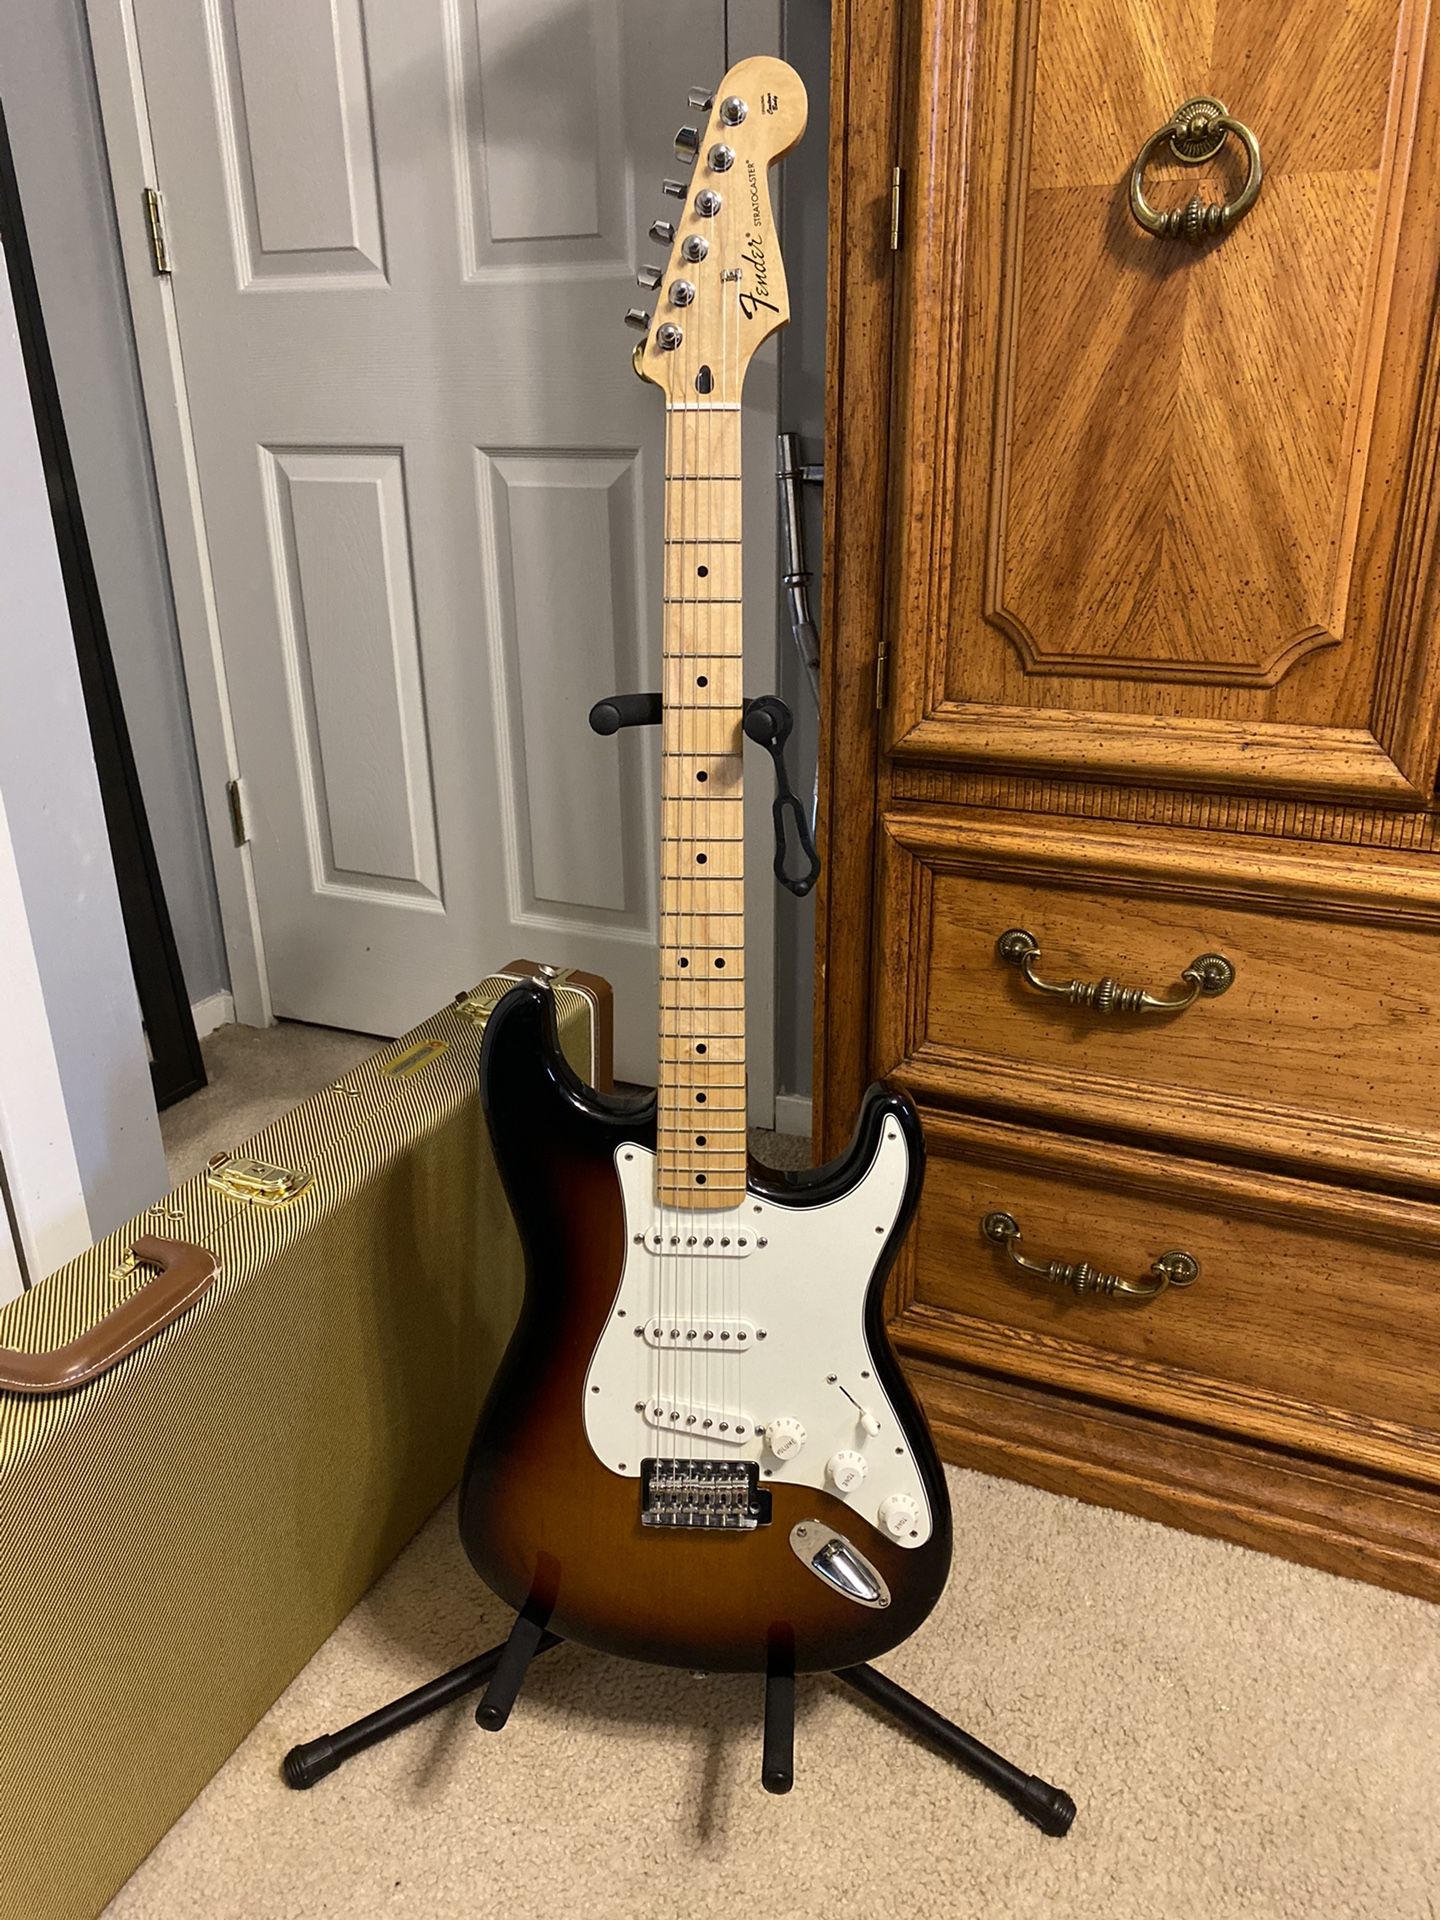 Fender Stratocaster electric guitar with case